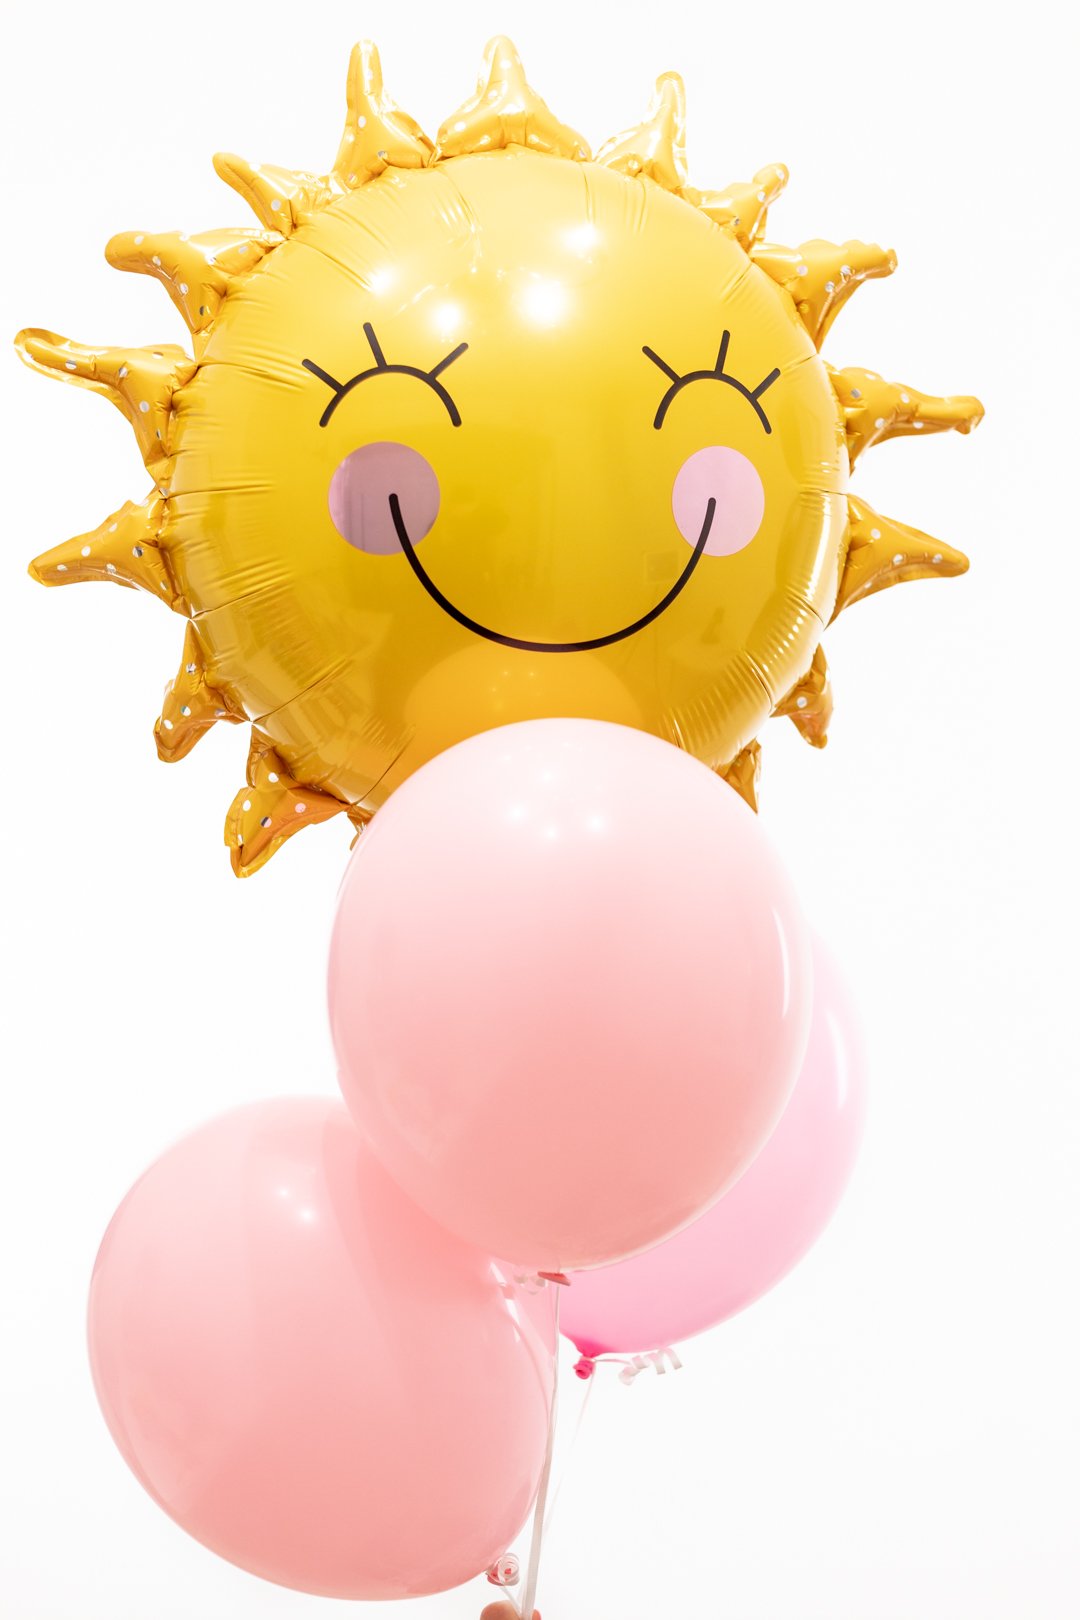 Sun balloon with pink cheeks and complimentary pink balloons.